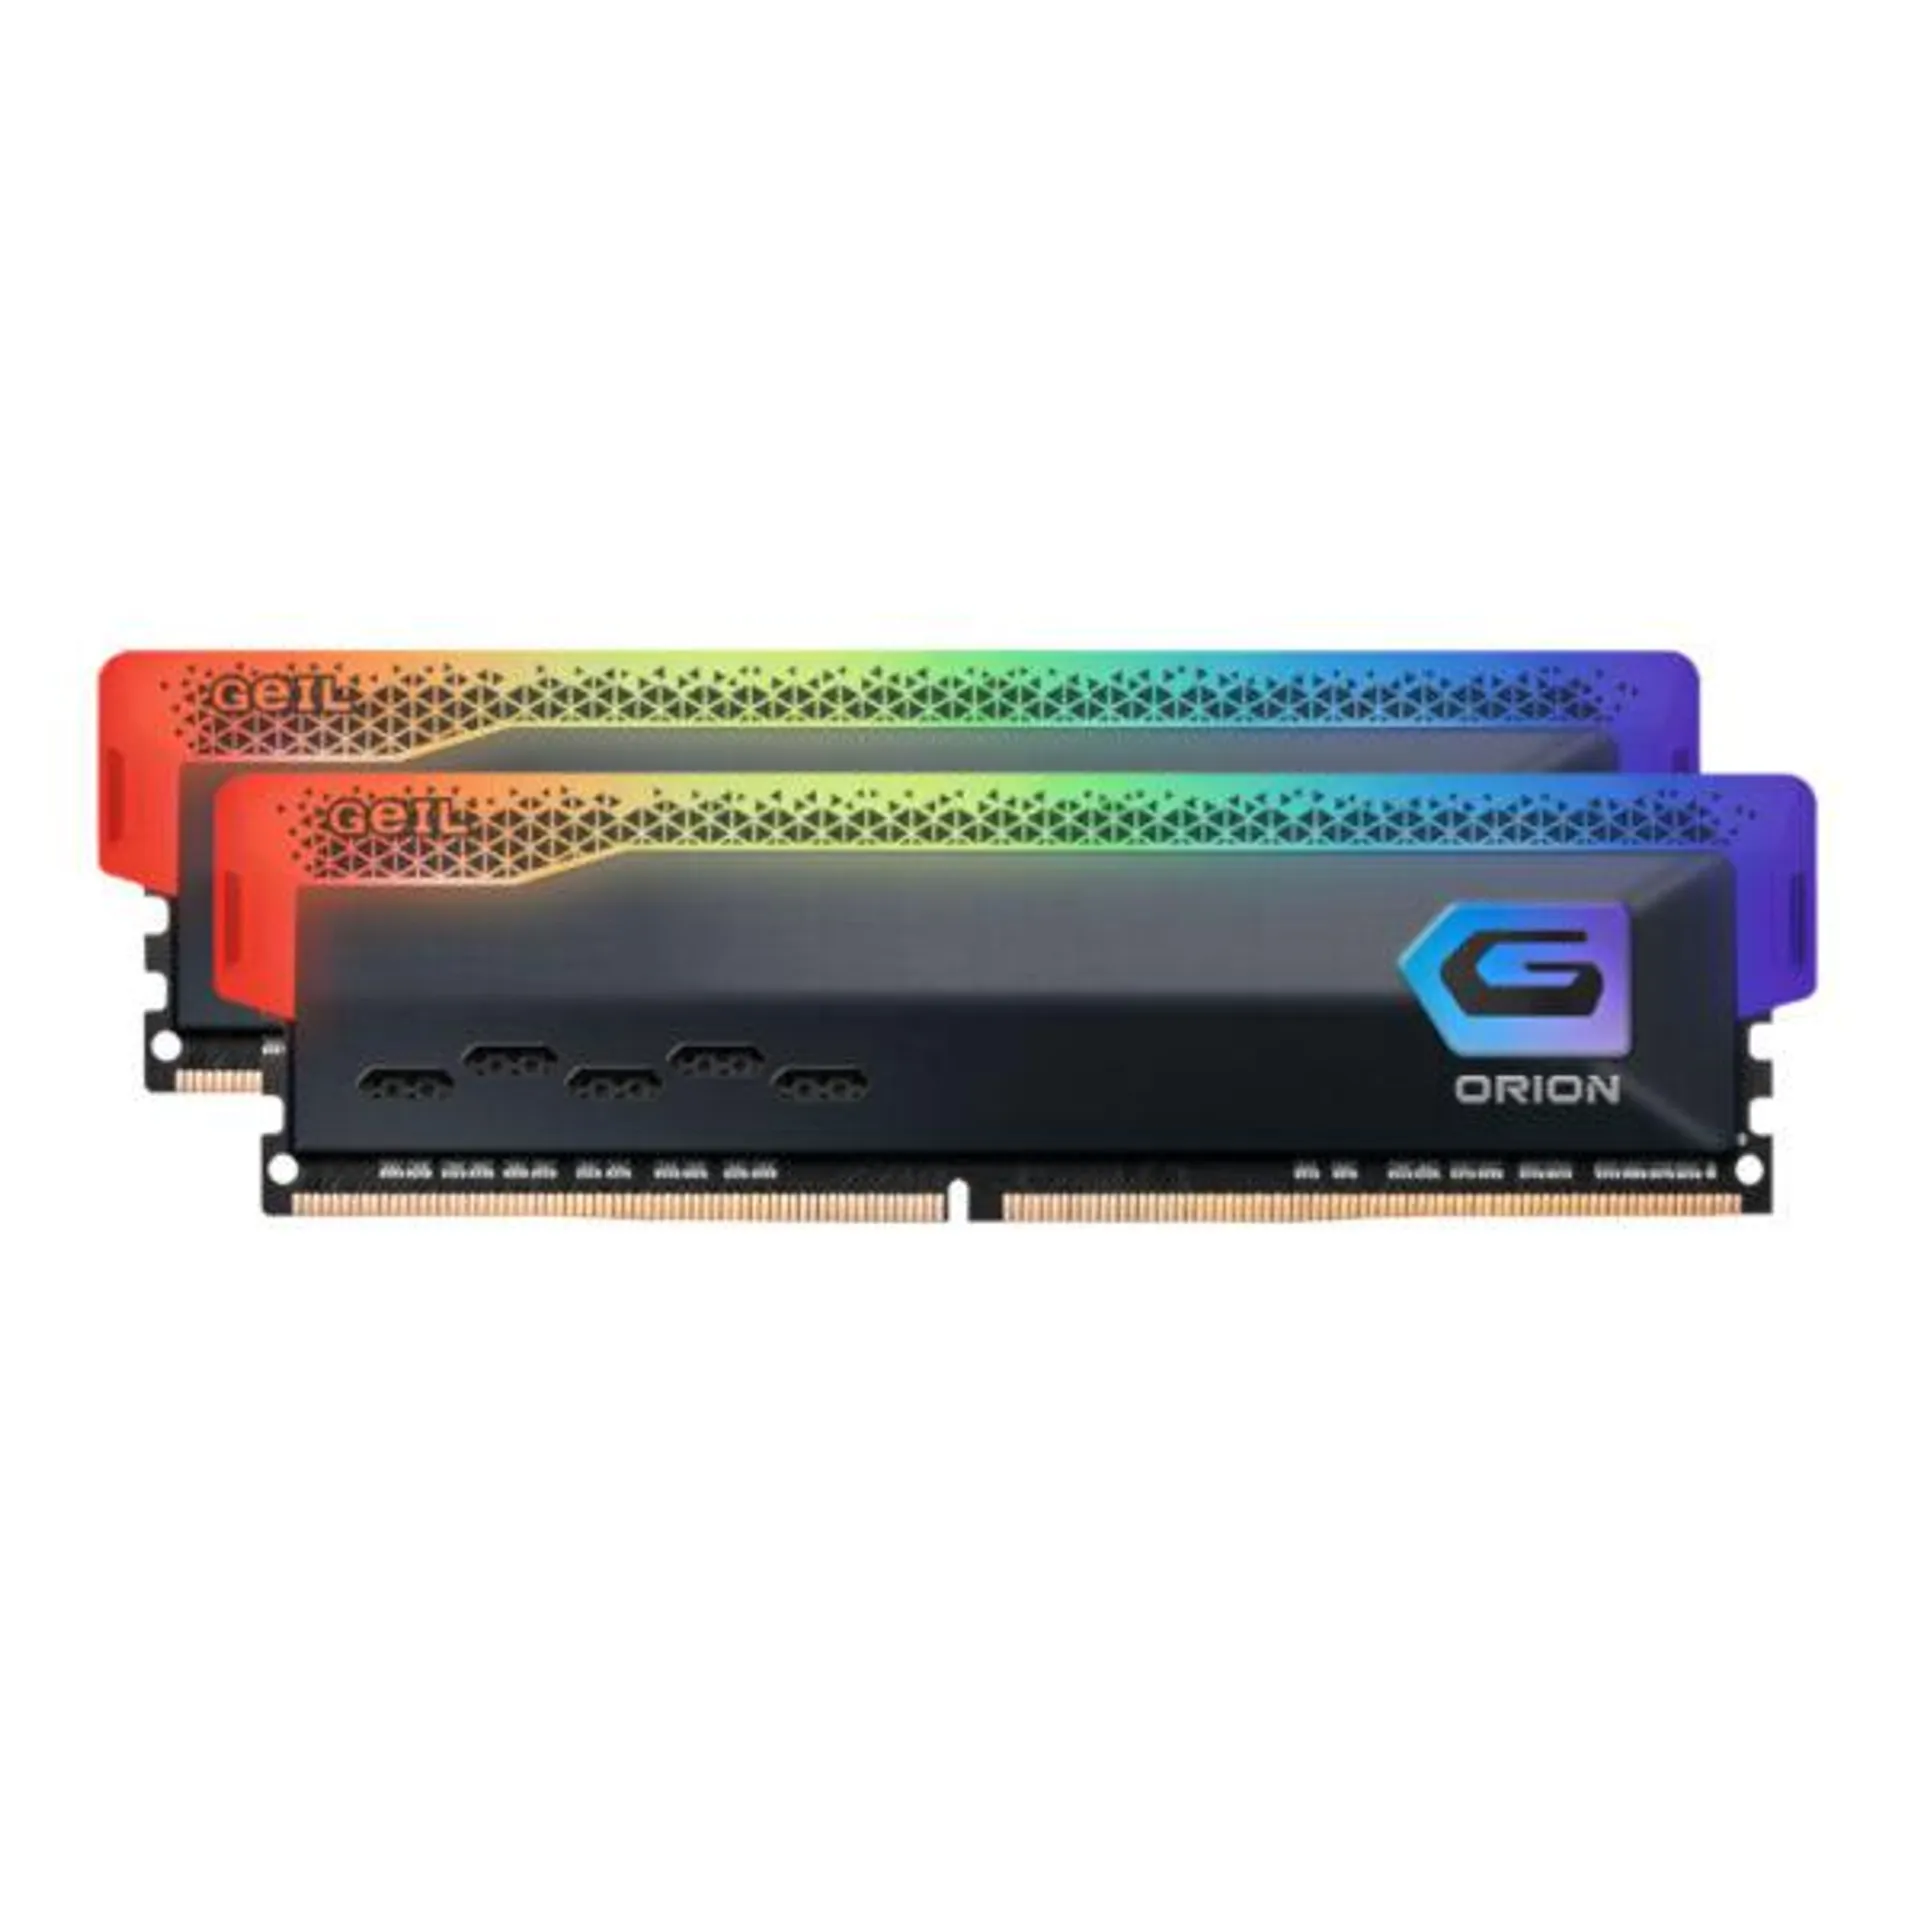 GEIL ORION DDR4-3600MHZ 32GB DIMM KIT GY